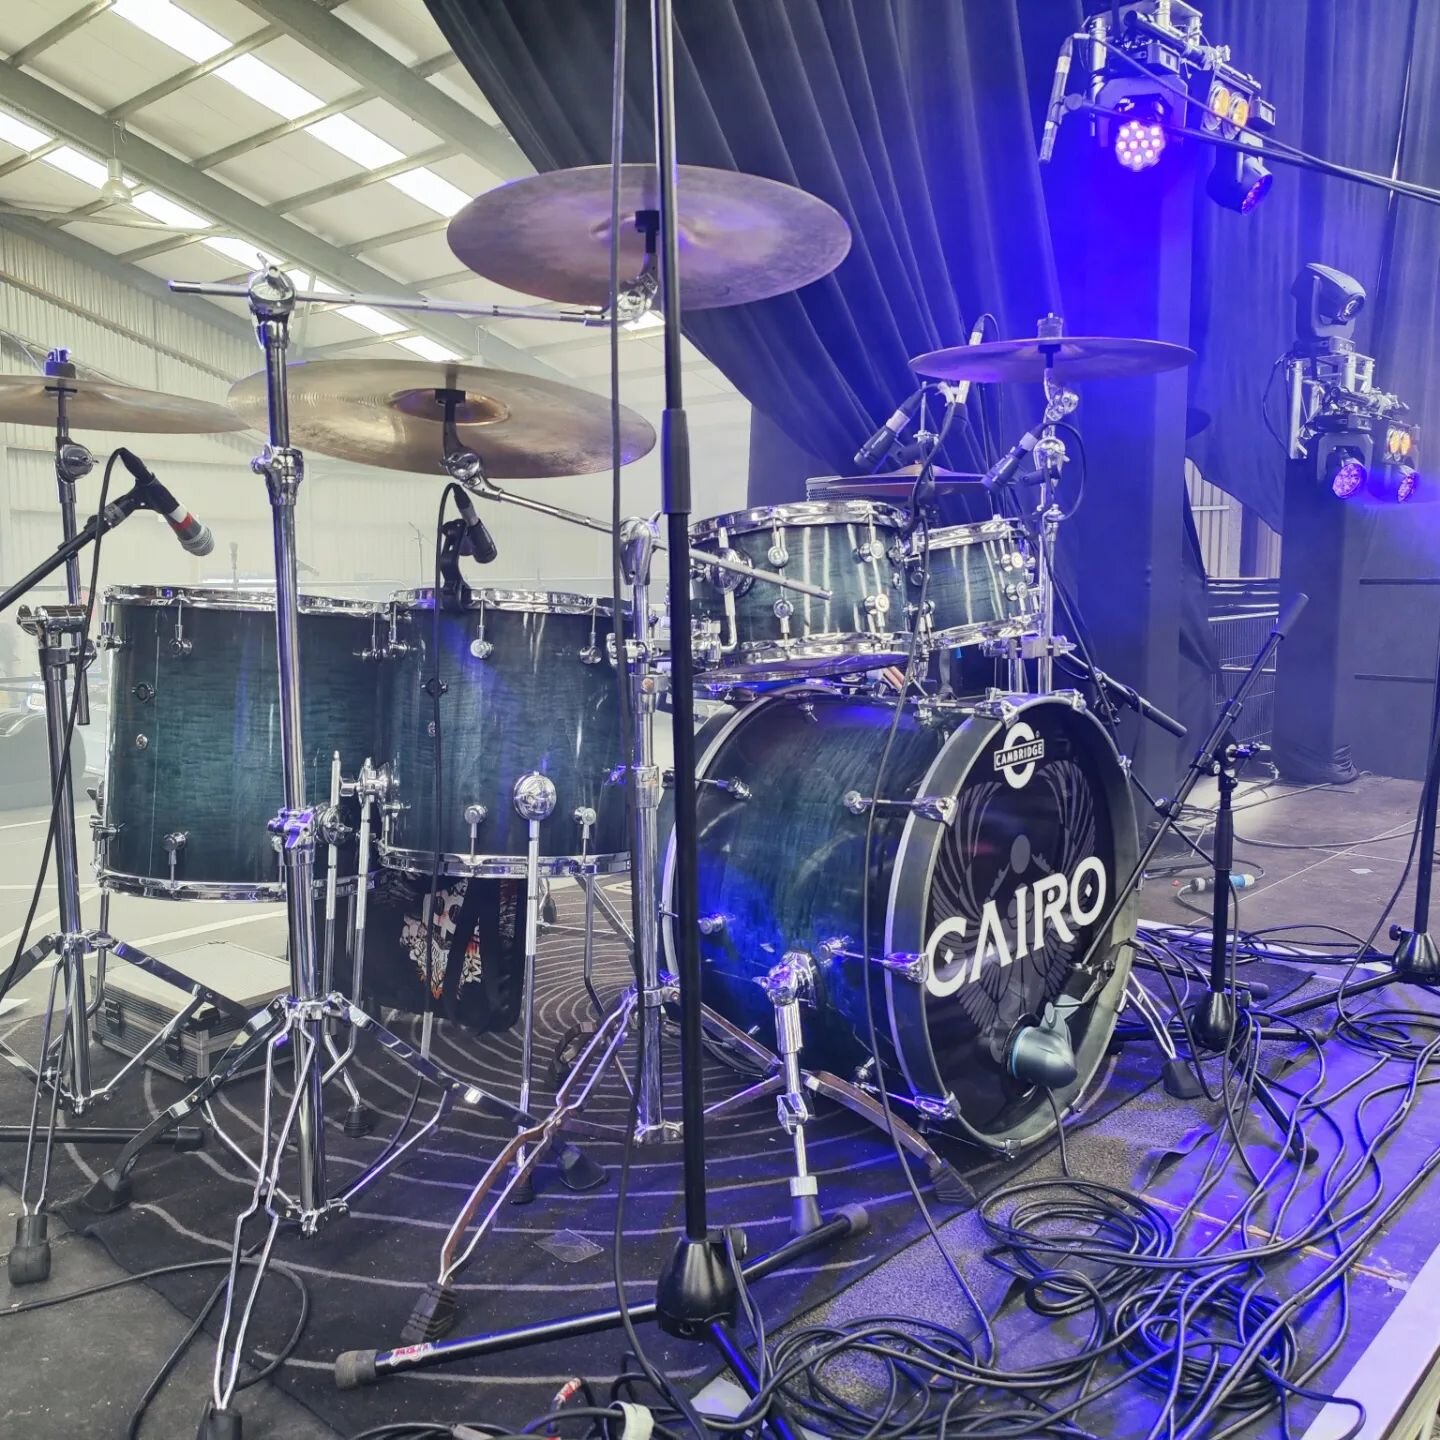 Ready to hit the main stage @cambridgerockfestival ! @cambridgedrumco kit looking INCREDIBLE!